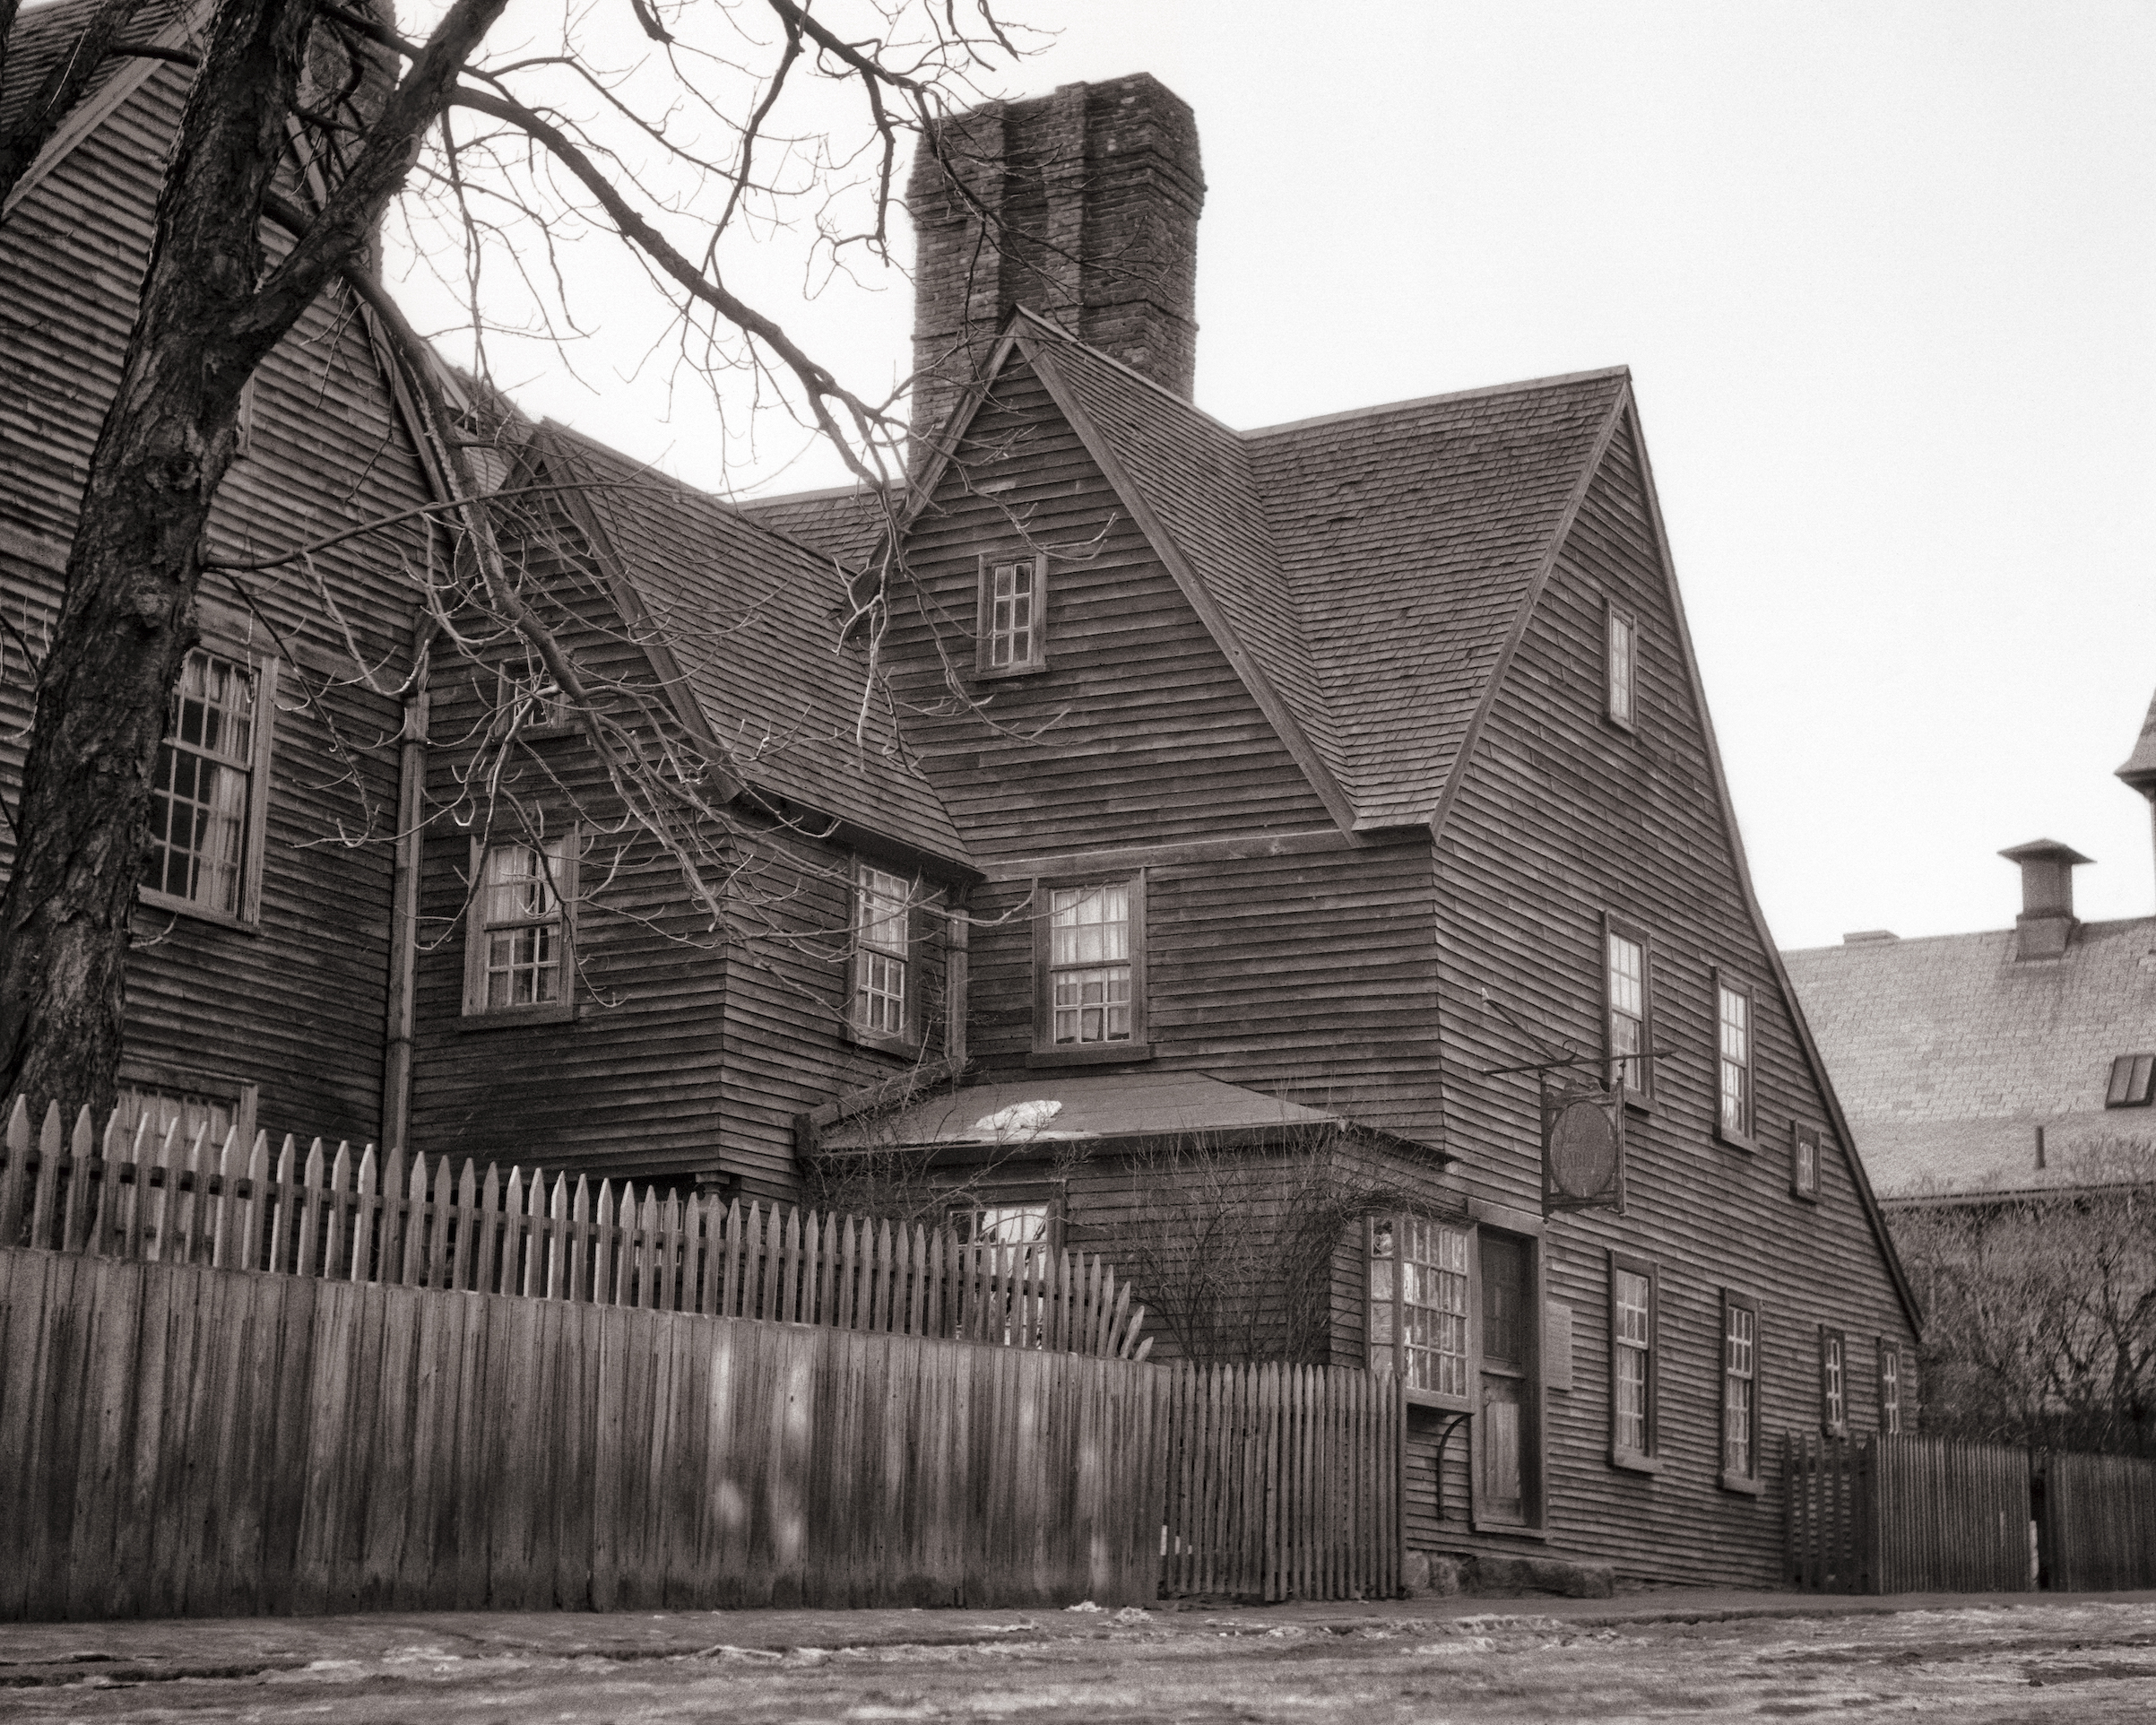 An image of The House of the Seven Gables, a 1668 home in Salem, Mass., in the 1940s (H. Armstrong Roberts/ClassicStock/Getty Images)